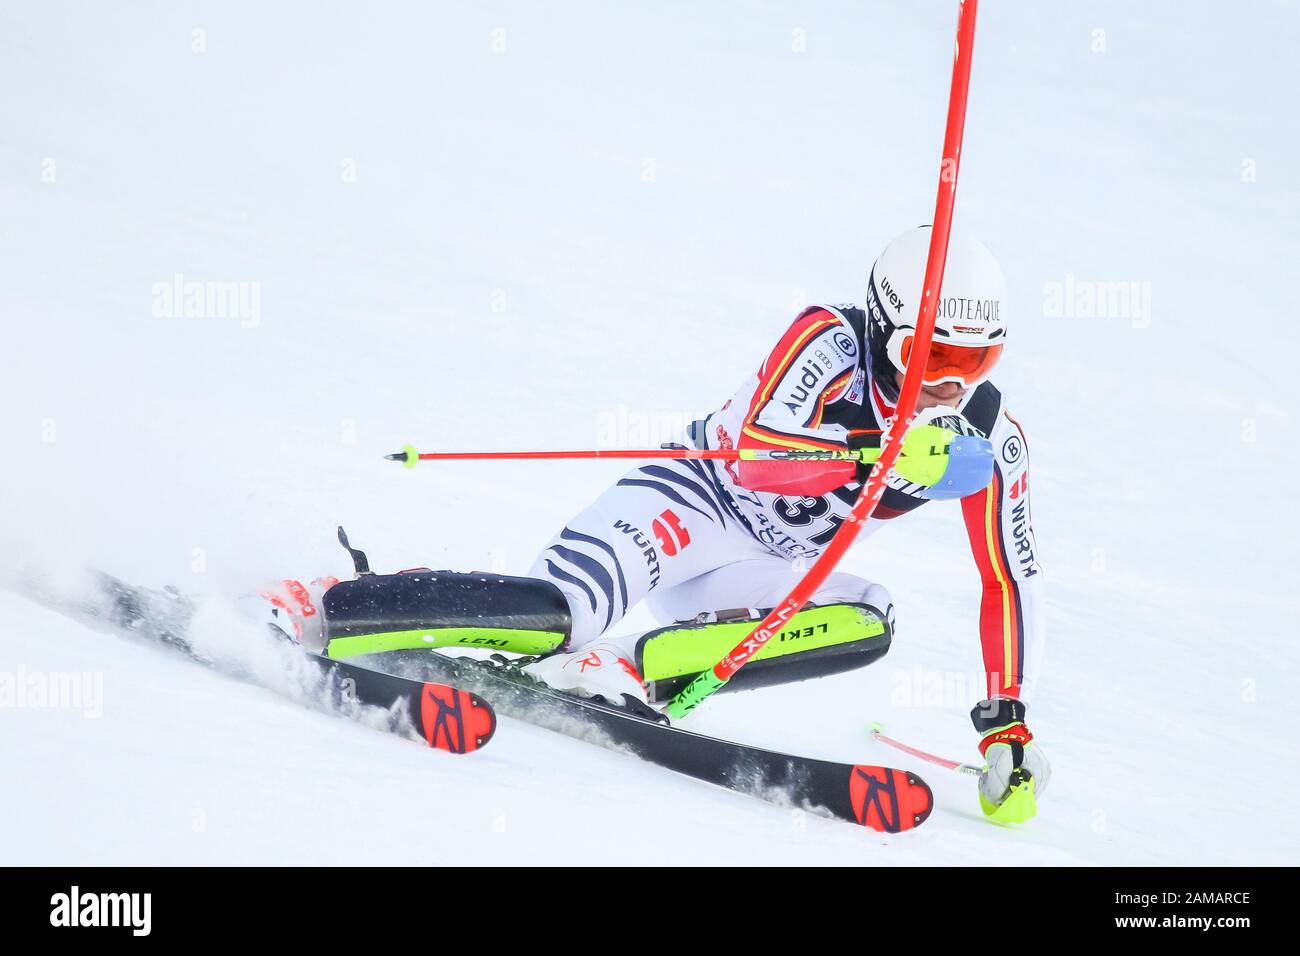 Zagreb, Croatia - January 5, 2020 : Linus Strasser from Germany competing during the Audi FIS Alpine Ski World Cup 2019/2020, 3rd Mens Slalom, Snow Qu Stock Photo